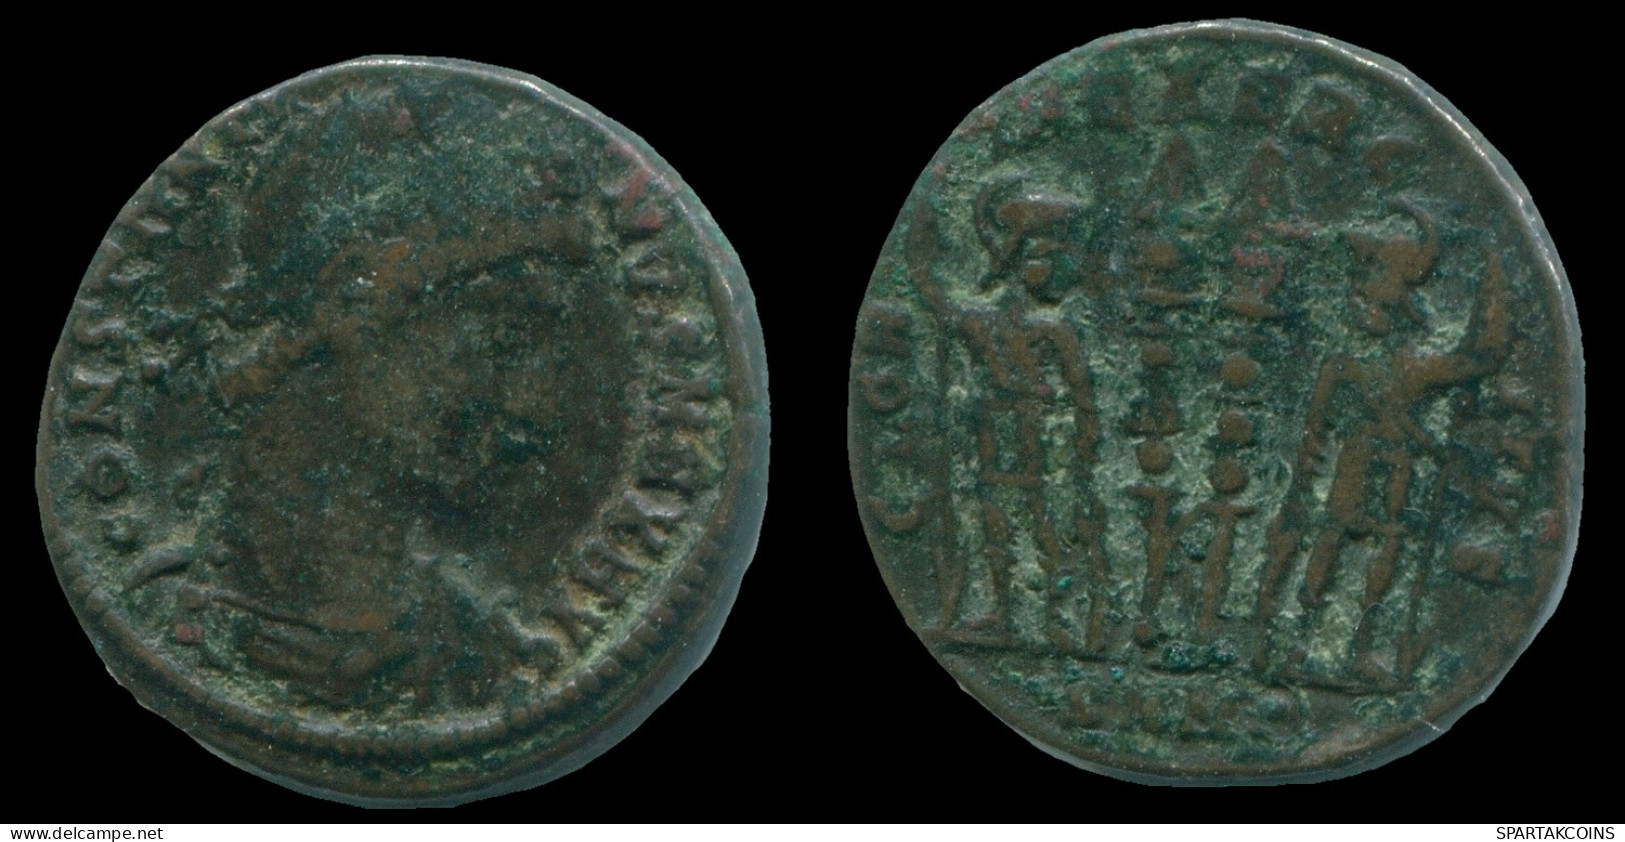 CONSTANTINE I NICOMEDIA Mint ( SMN ) TWO SOLDIERS #ANC13185.18.U.A - El Imperio Christiano (307 / 363)